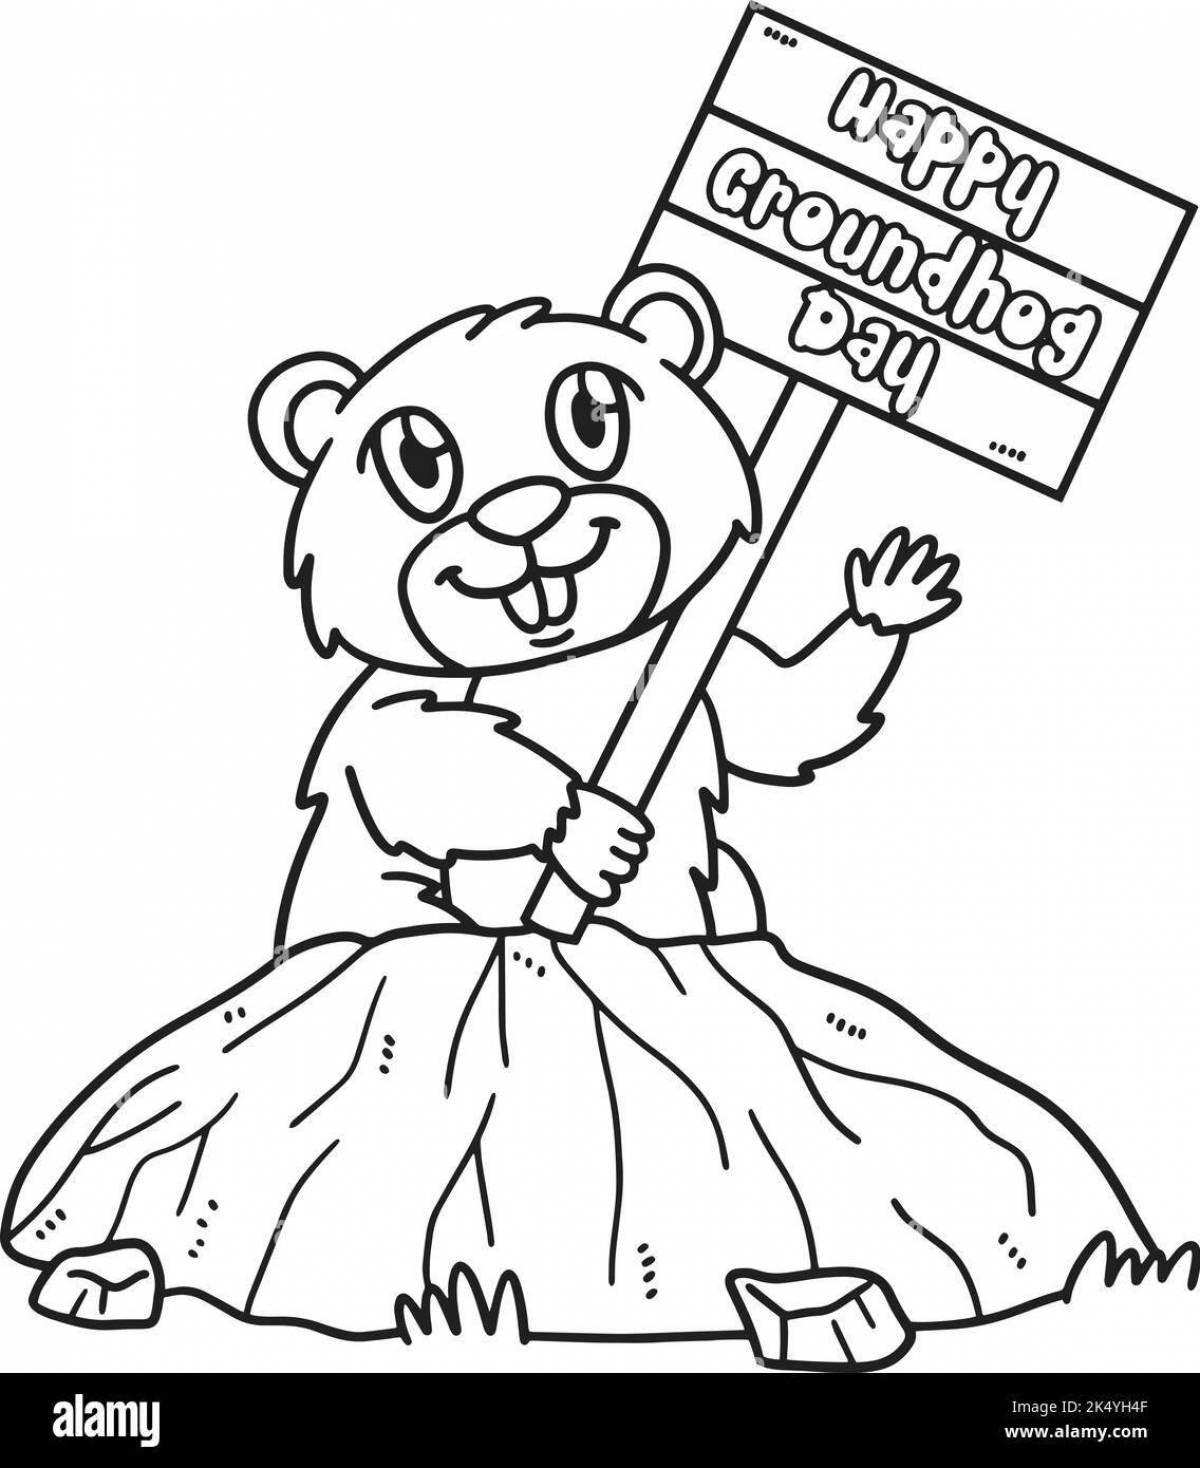 Groundhog Day coloring page